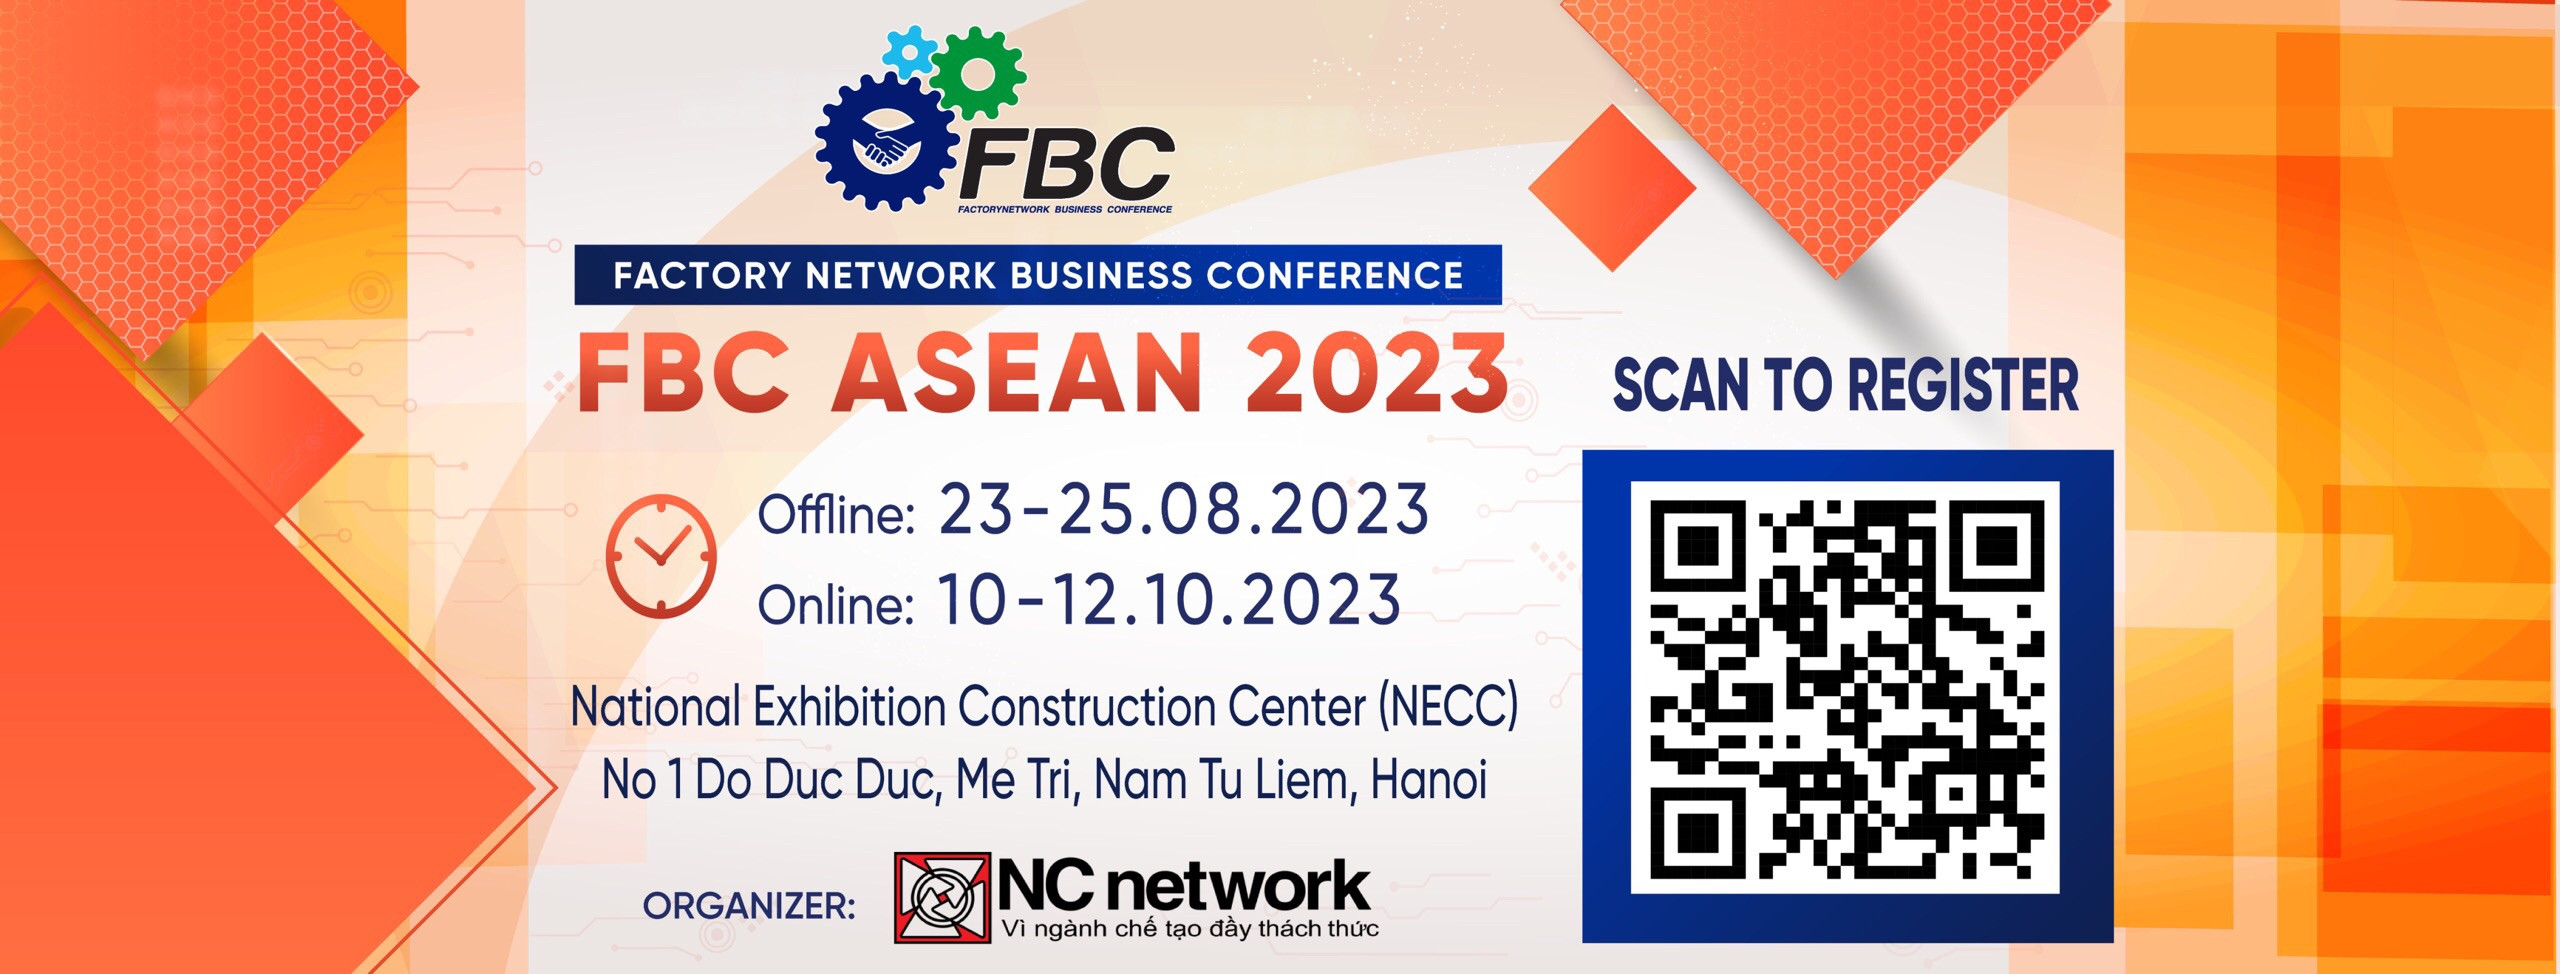 Factory Network Business Conference ASEAN 2023 - Exhibitors List (2)